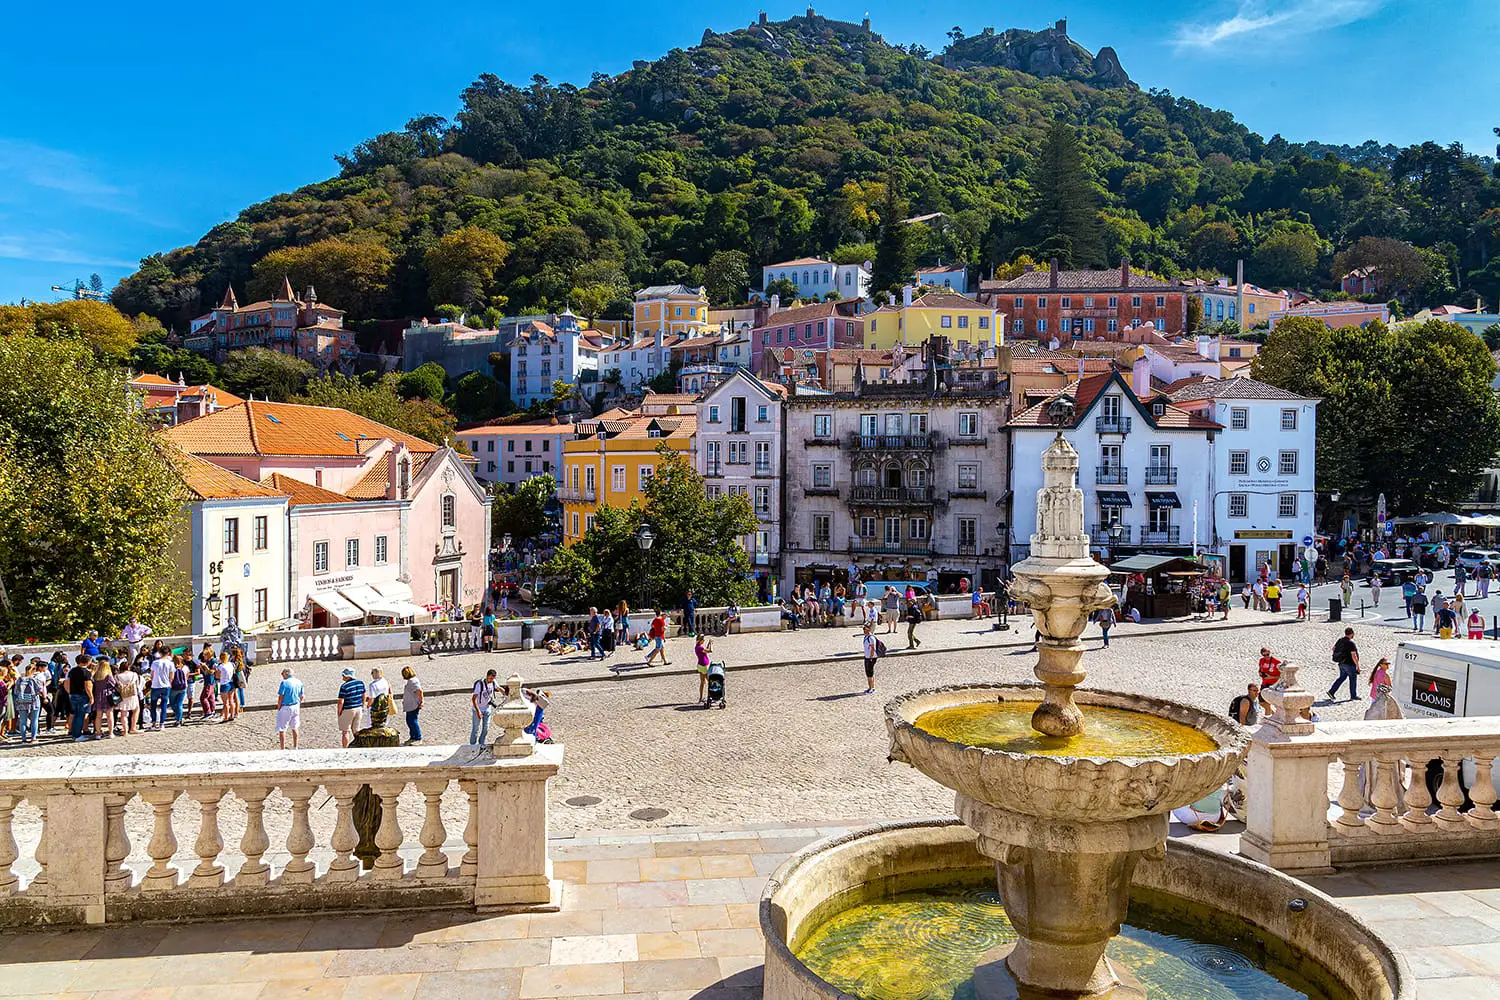 Historic center of the city of Sintra, in Portugal, seen from the balcony of the National Palace of Sintra, former residence of the royal family